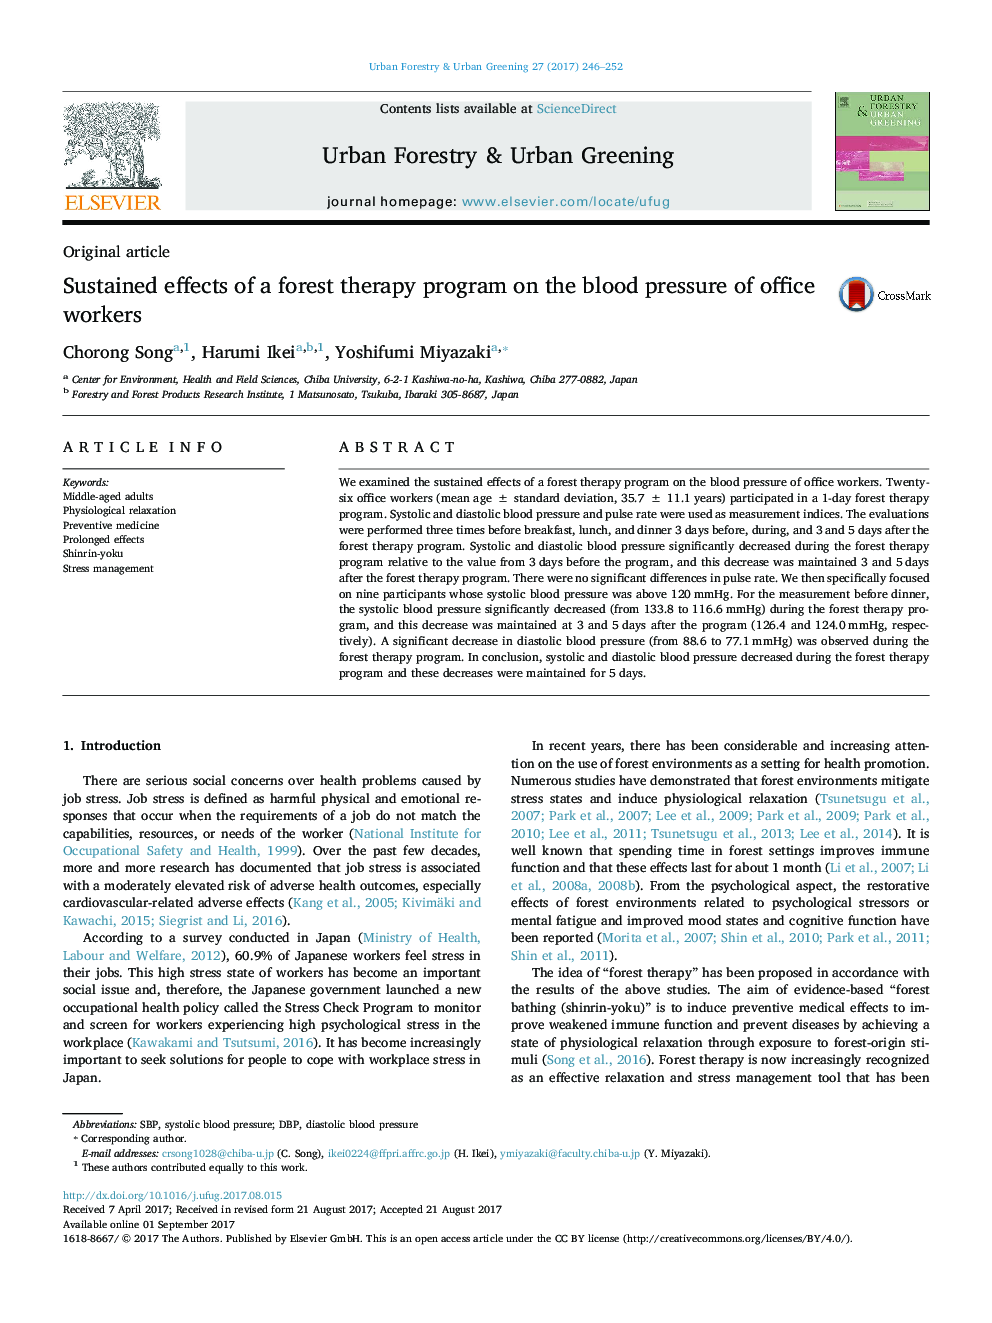 Sustained effects of a forest therapy program on the blood pressure of office workers